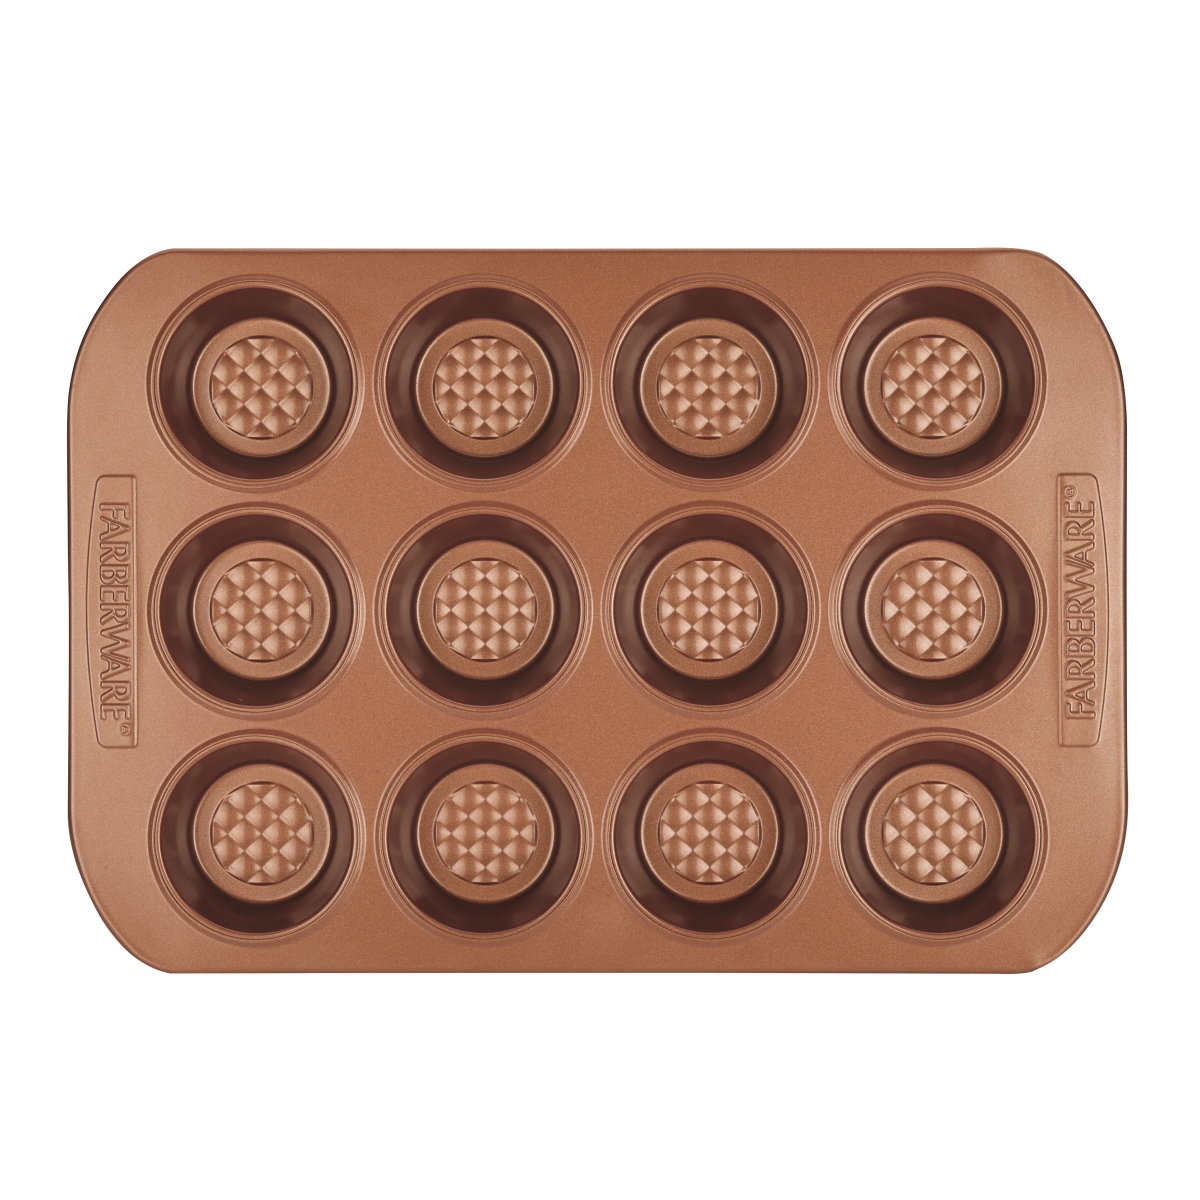 47142 Colorvive Nonstick 12 Cup Muffin Pan, Copper